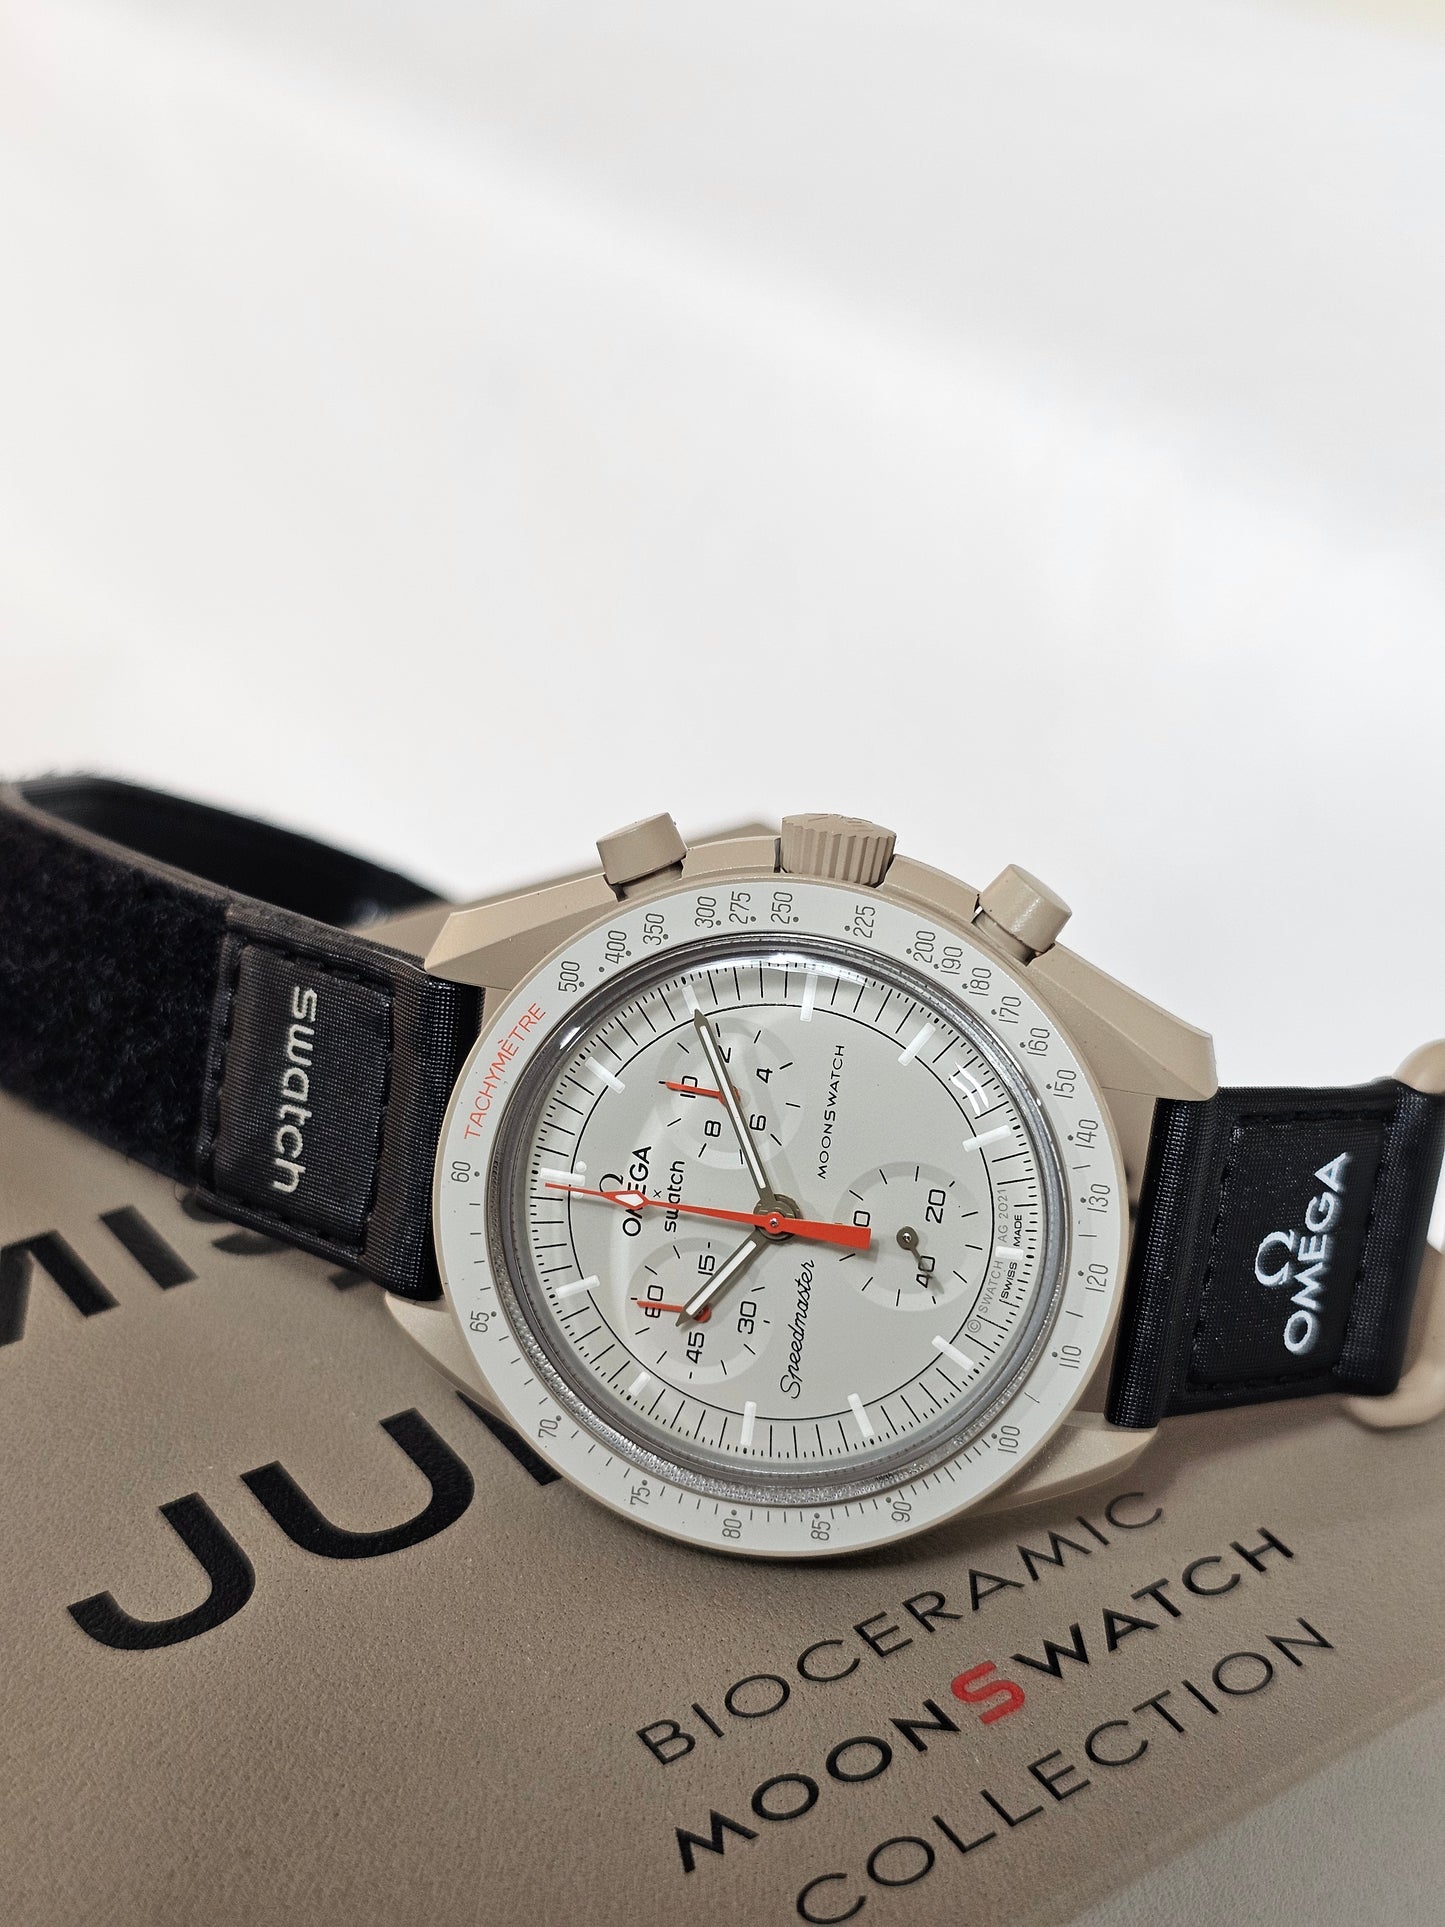 Swatch Moonswatch - Mission to Jupiter: A Cosmic Odyssey on Your Wrist